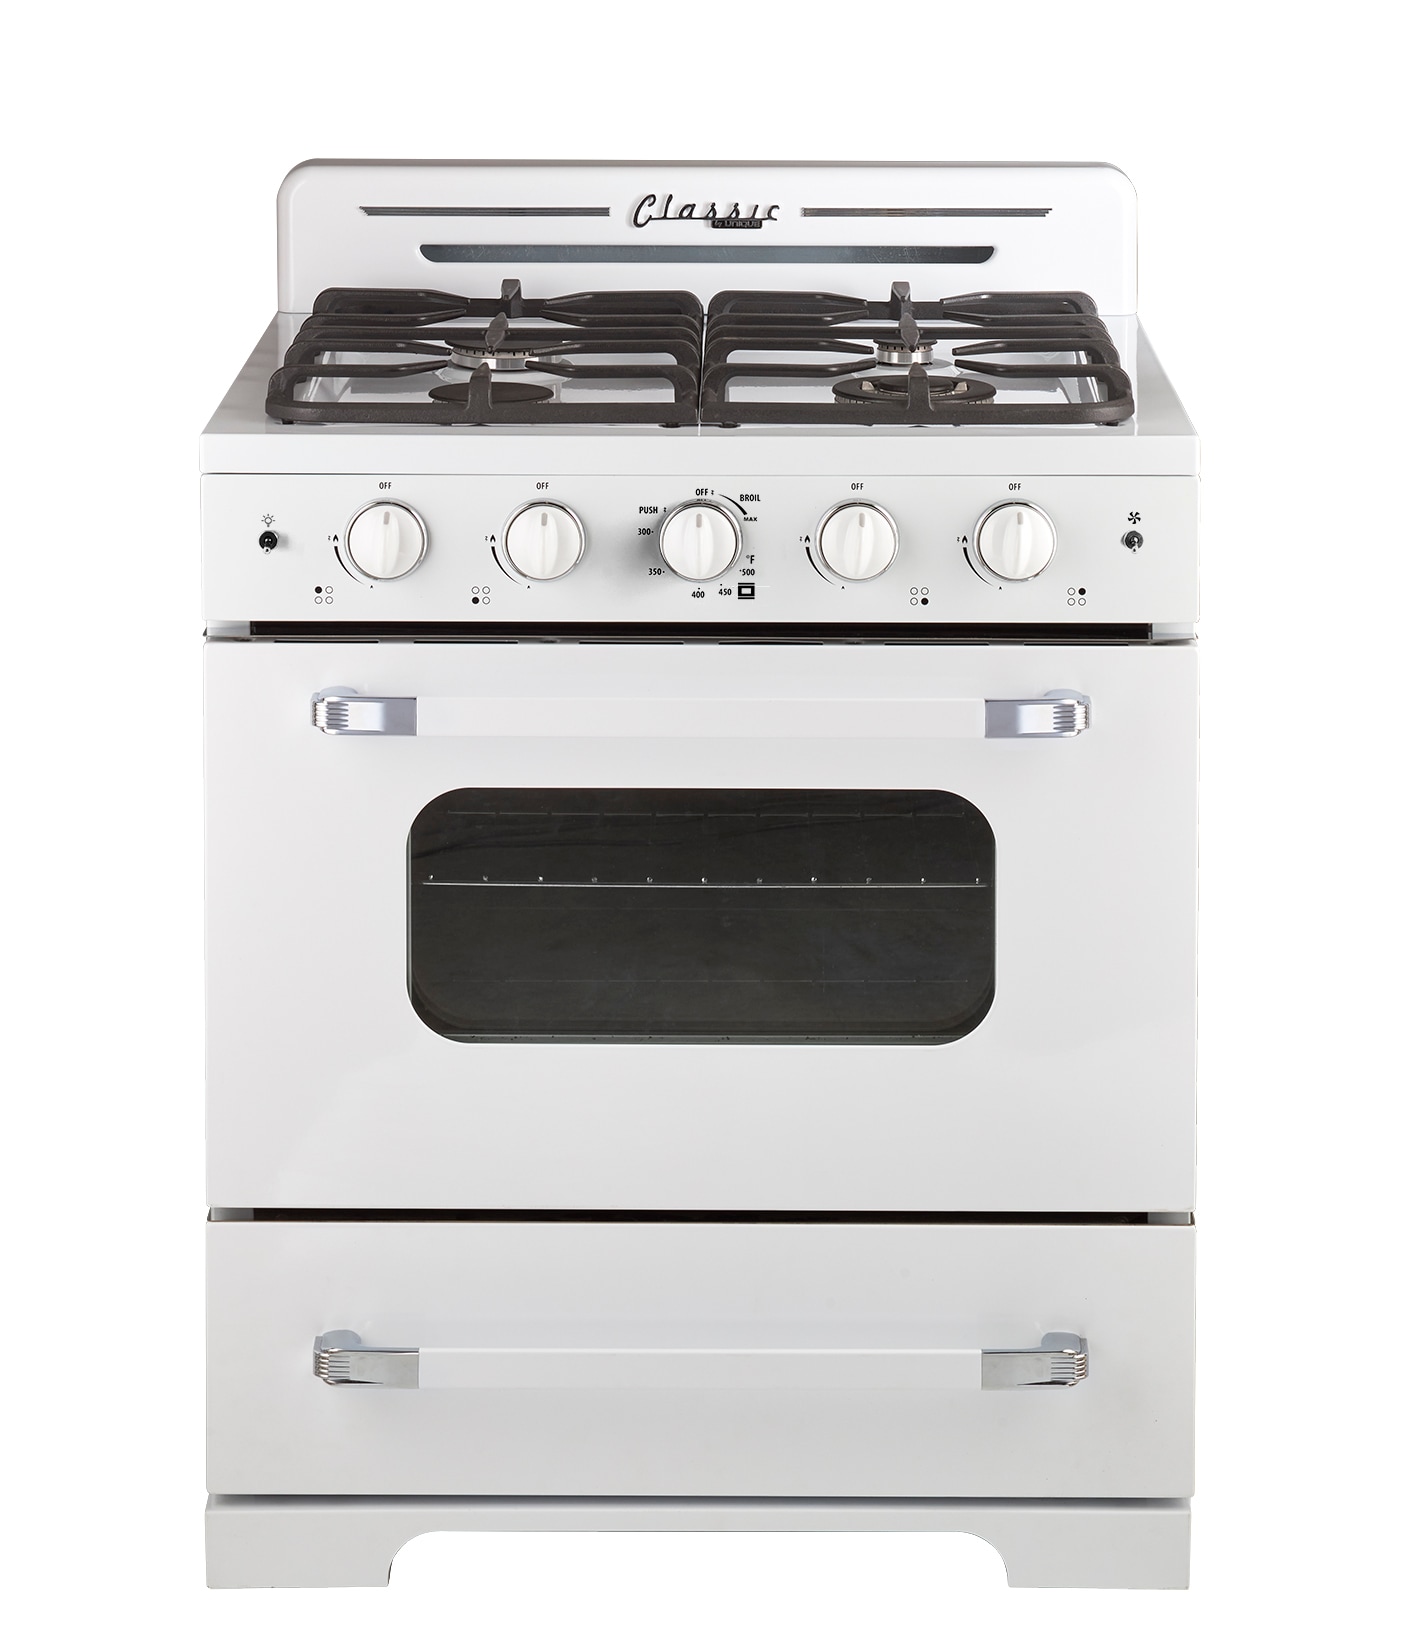 Maxi 400 4 Burner Manual Ignition Table Top Gas Cooker, Maxi-400 in 2023